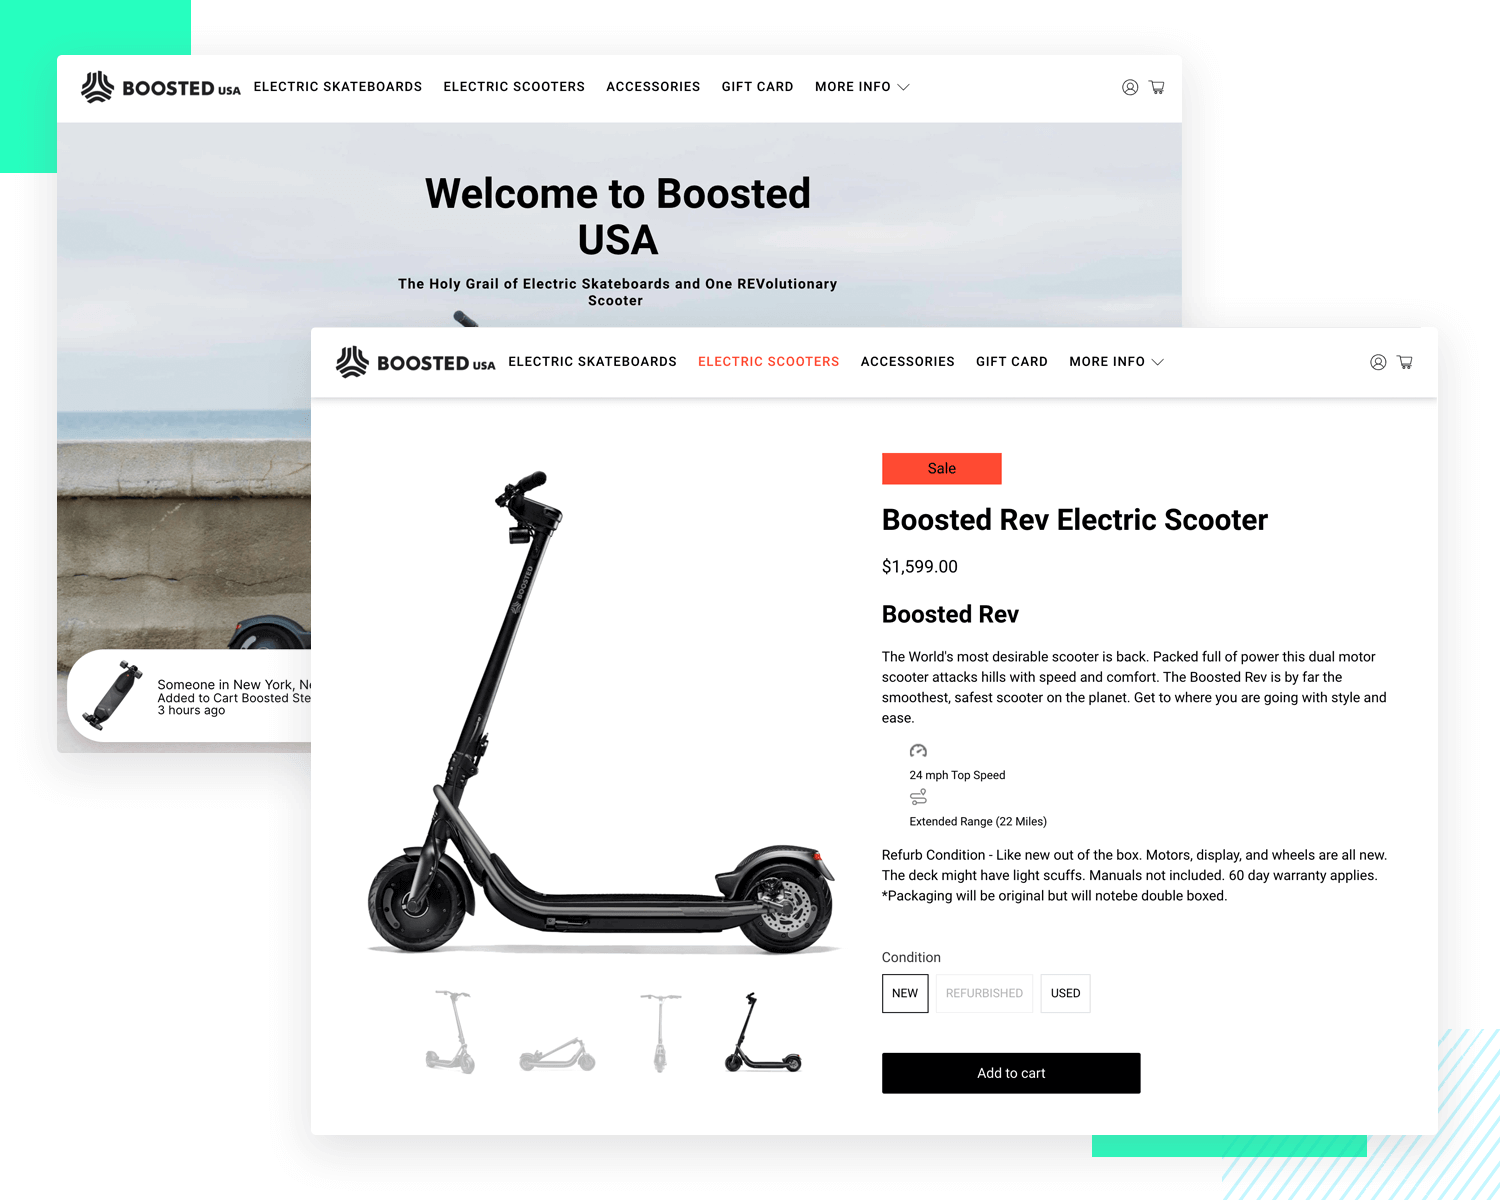 UI design inspiration from boosted boards